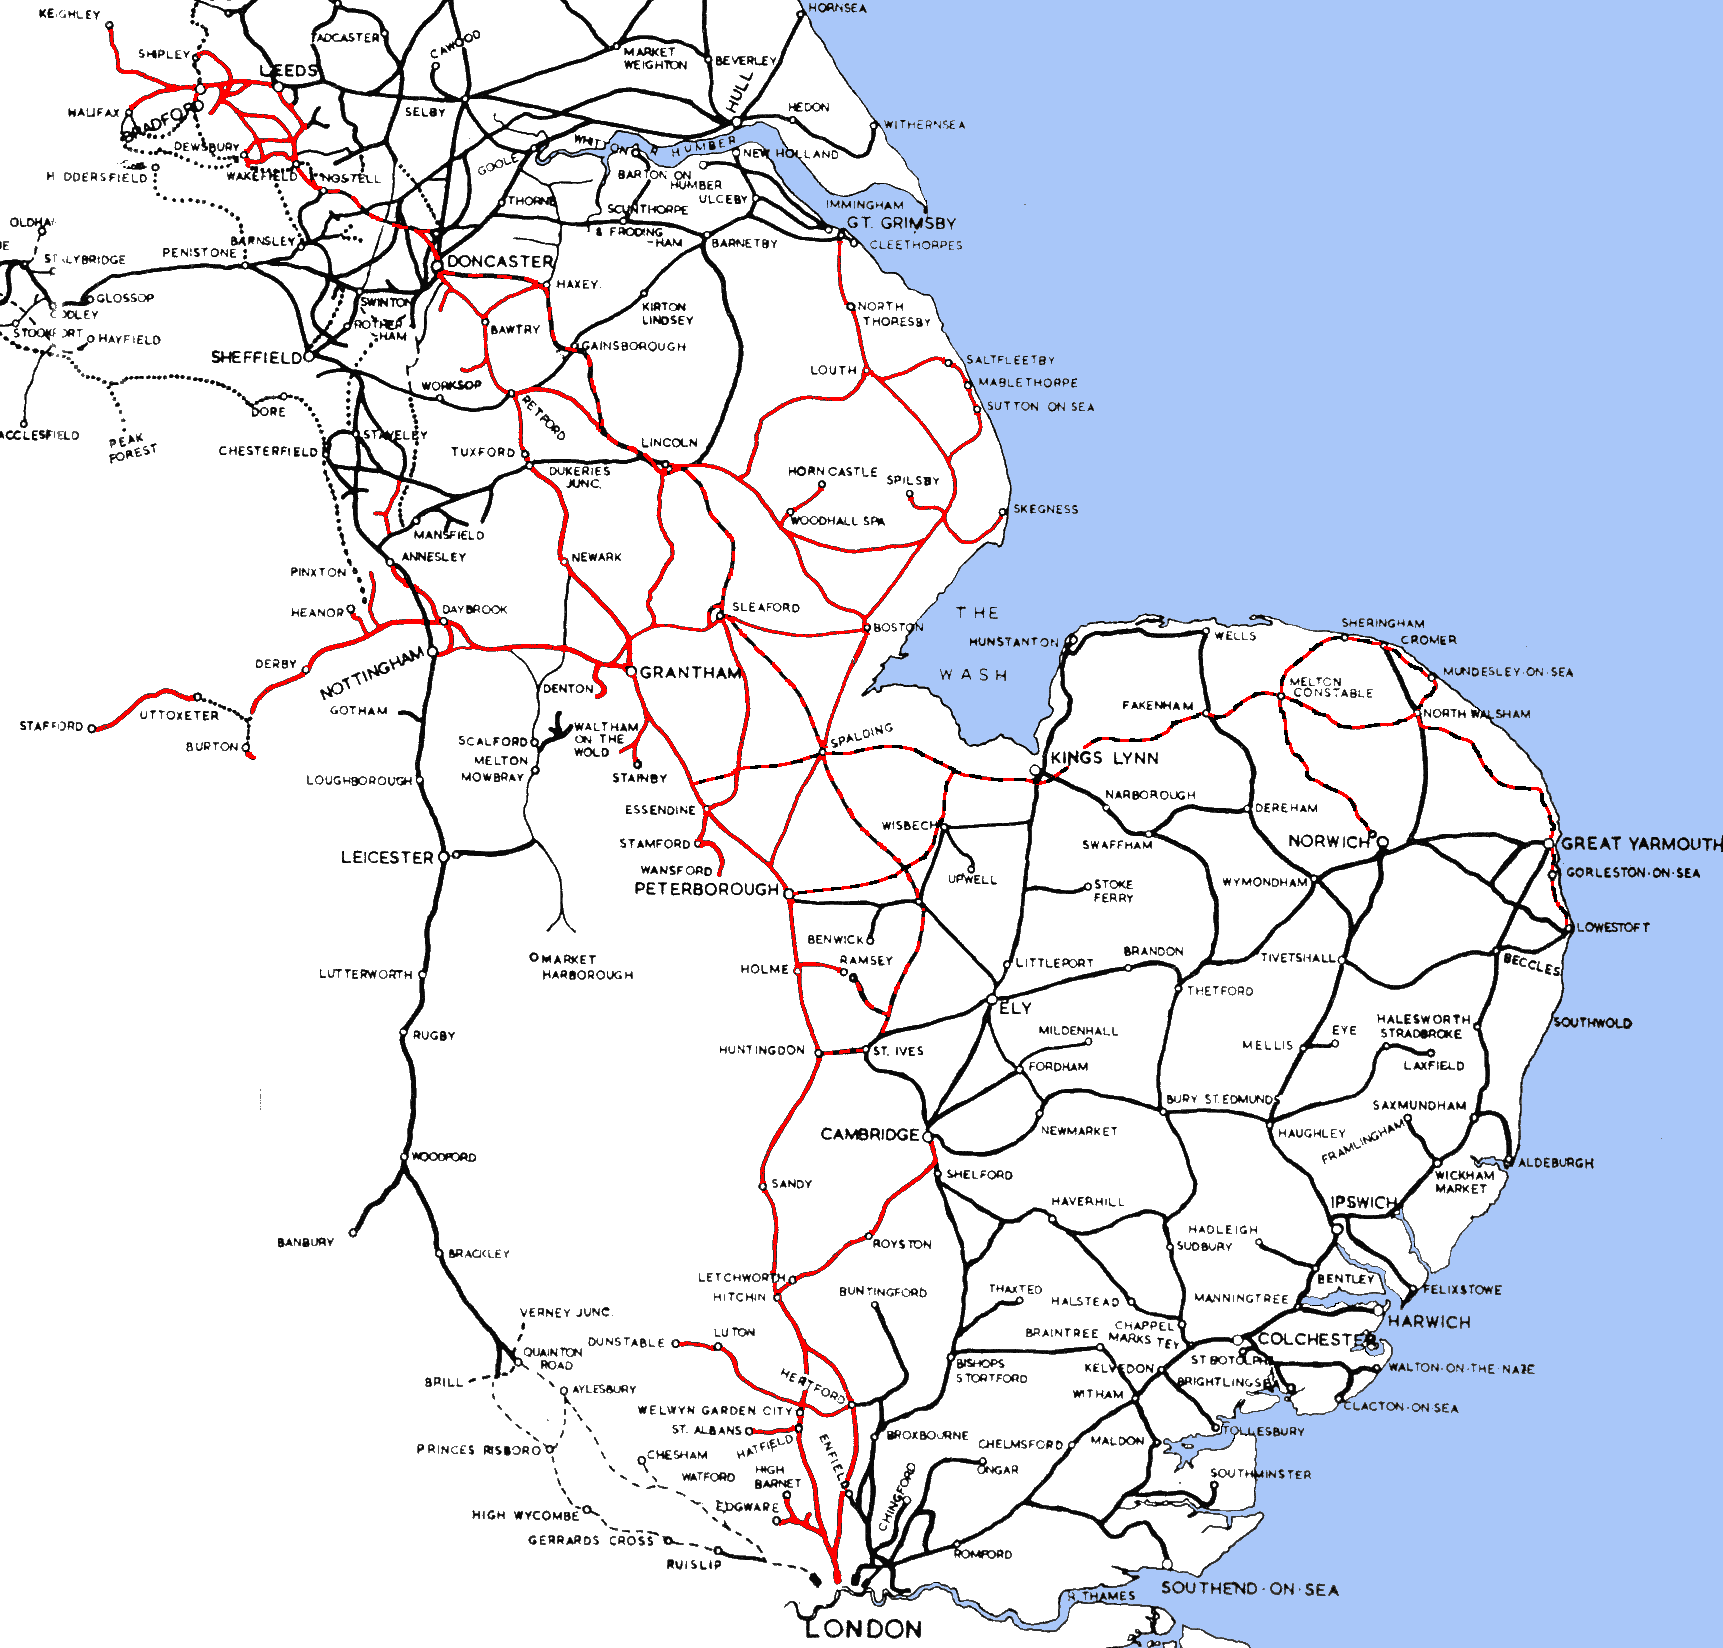 great northern railroad routes